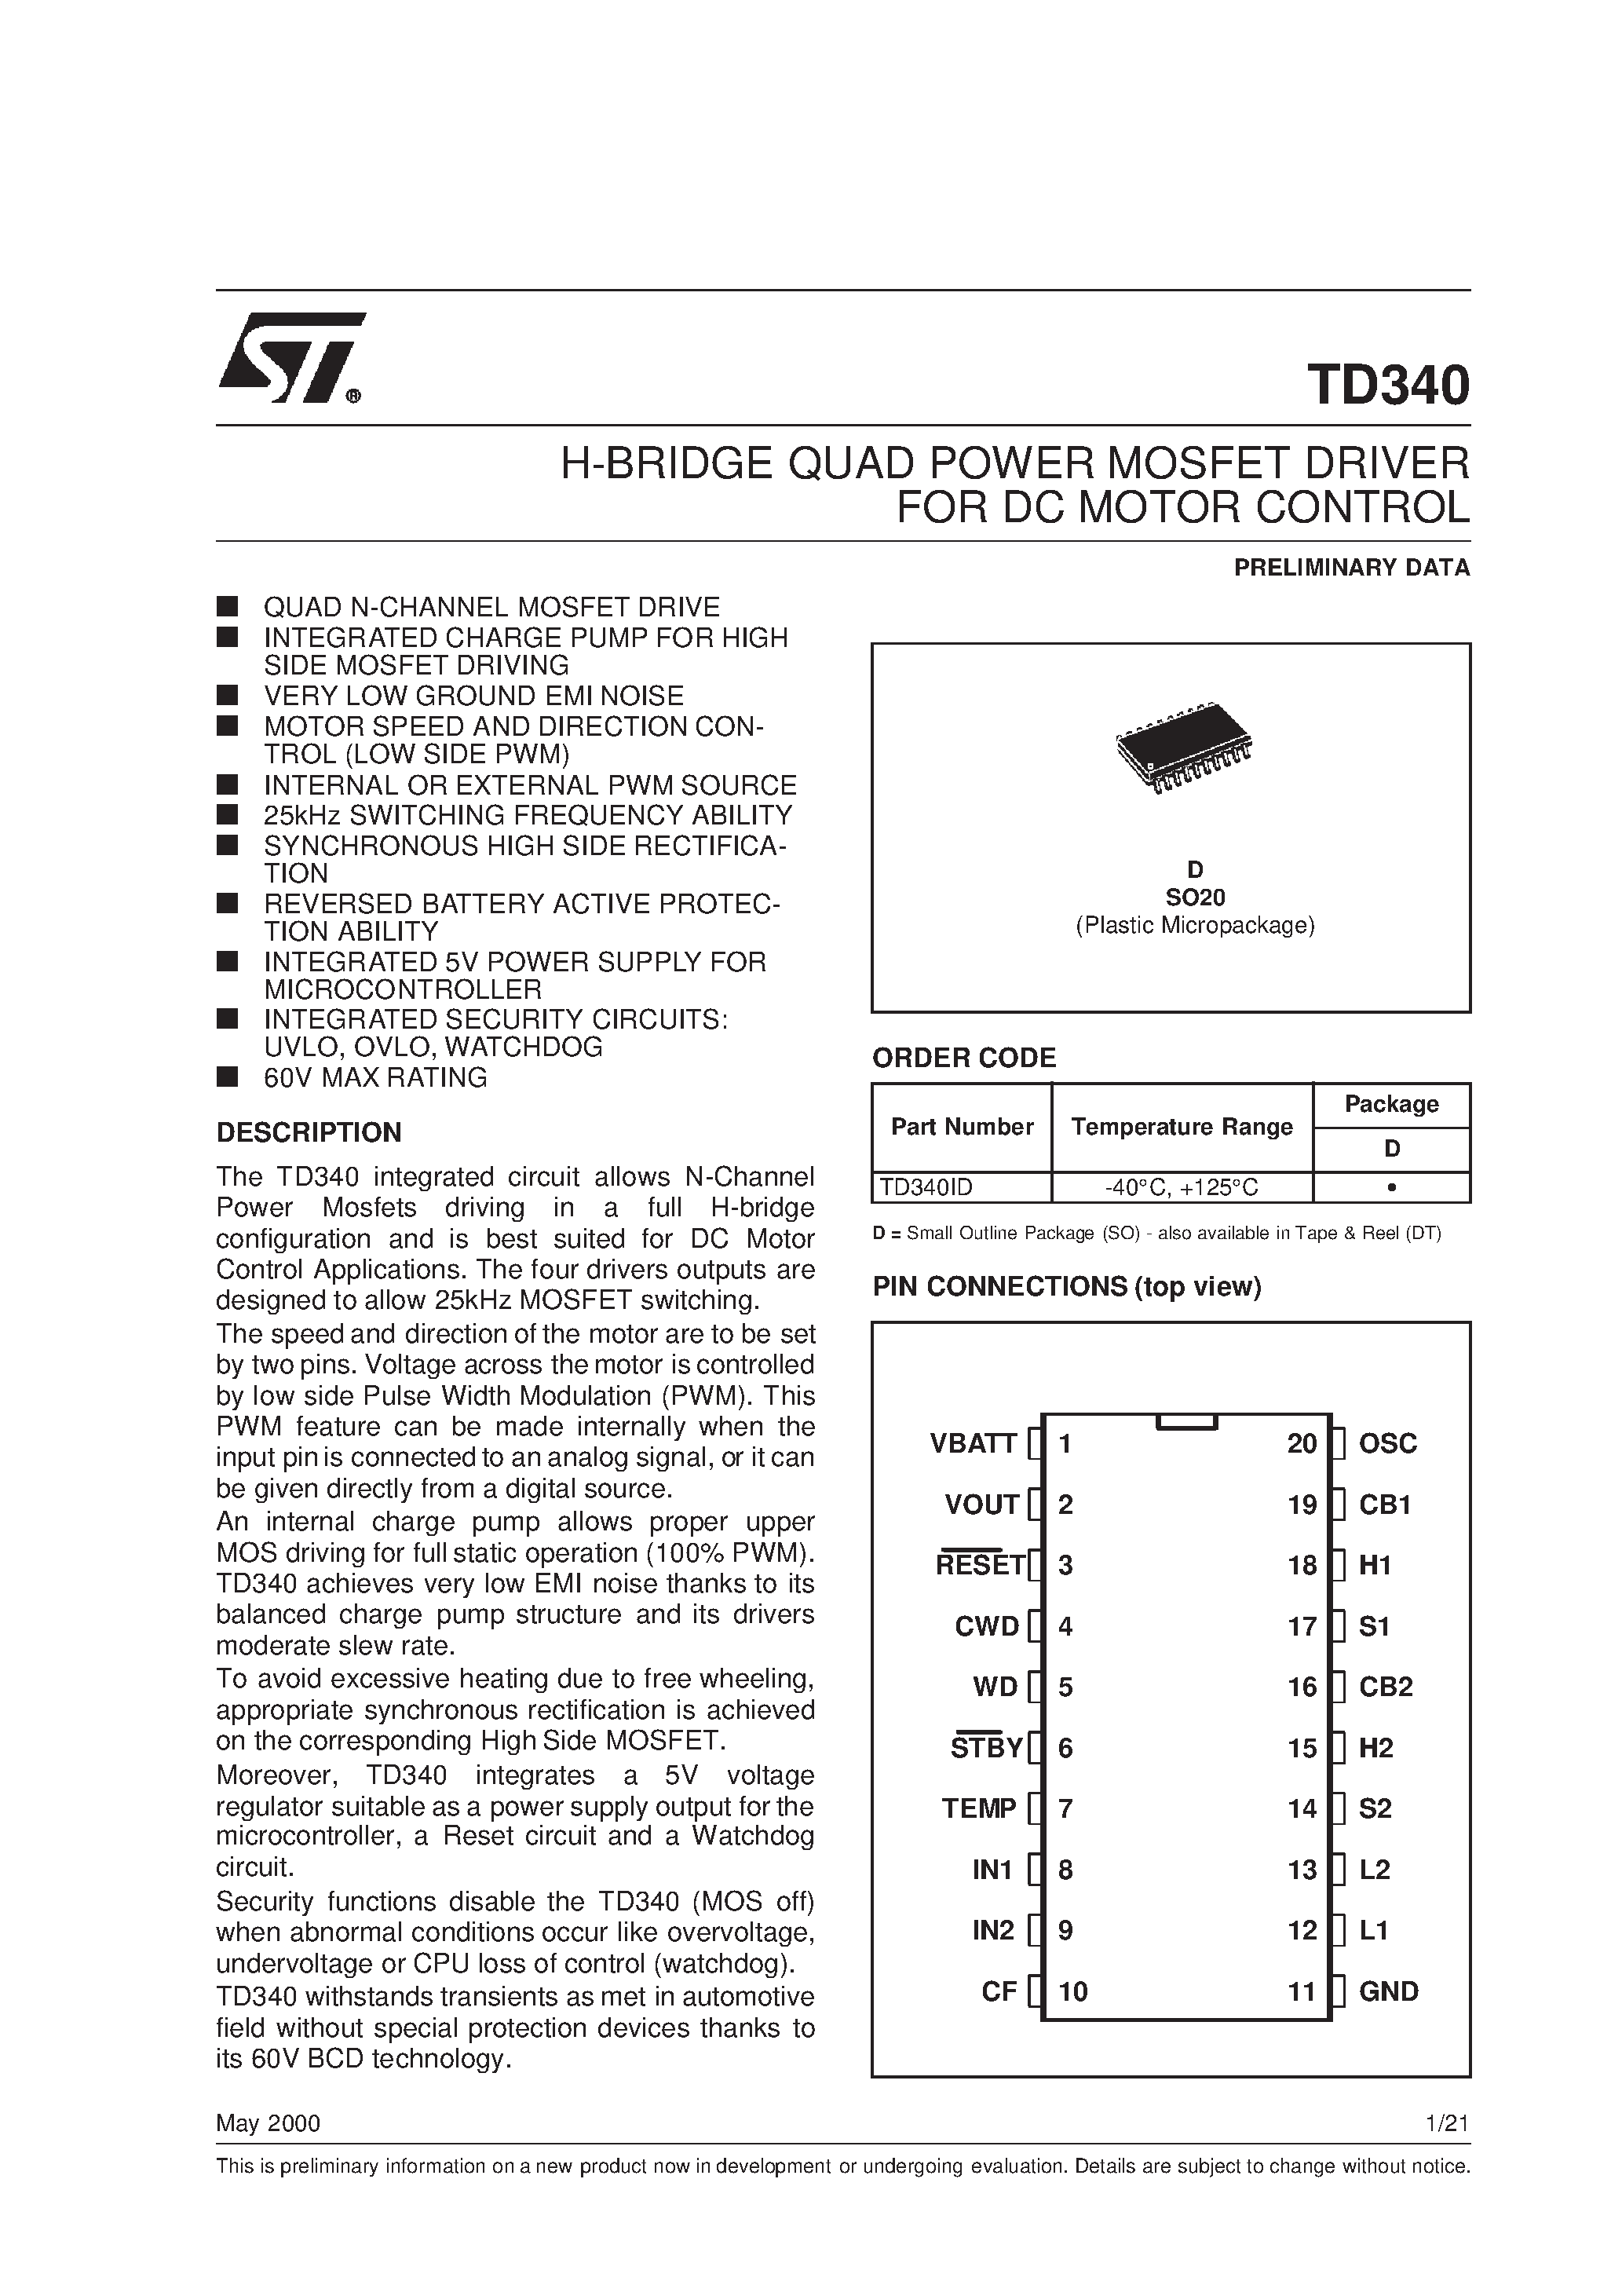 Datasheet TD340 - H-BRIDGE QUAD POWER MOSFET DRIVER FOR DC MOTOR CONTROL page 1